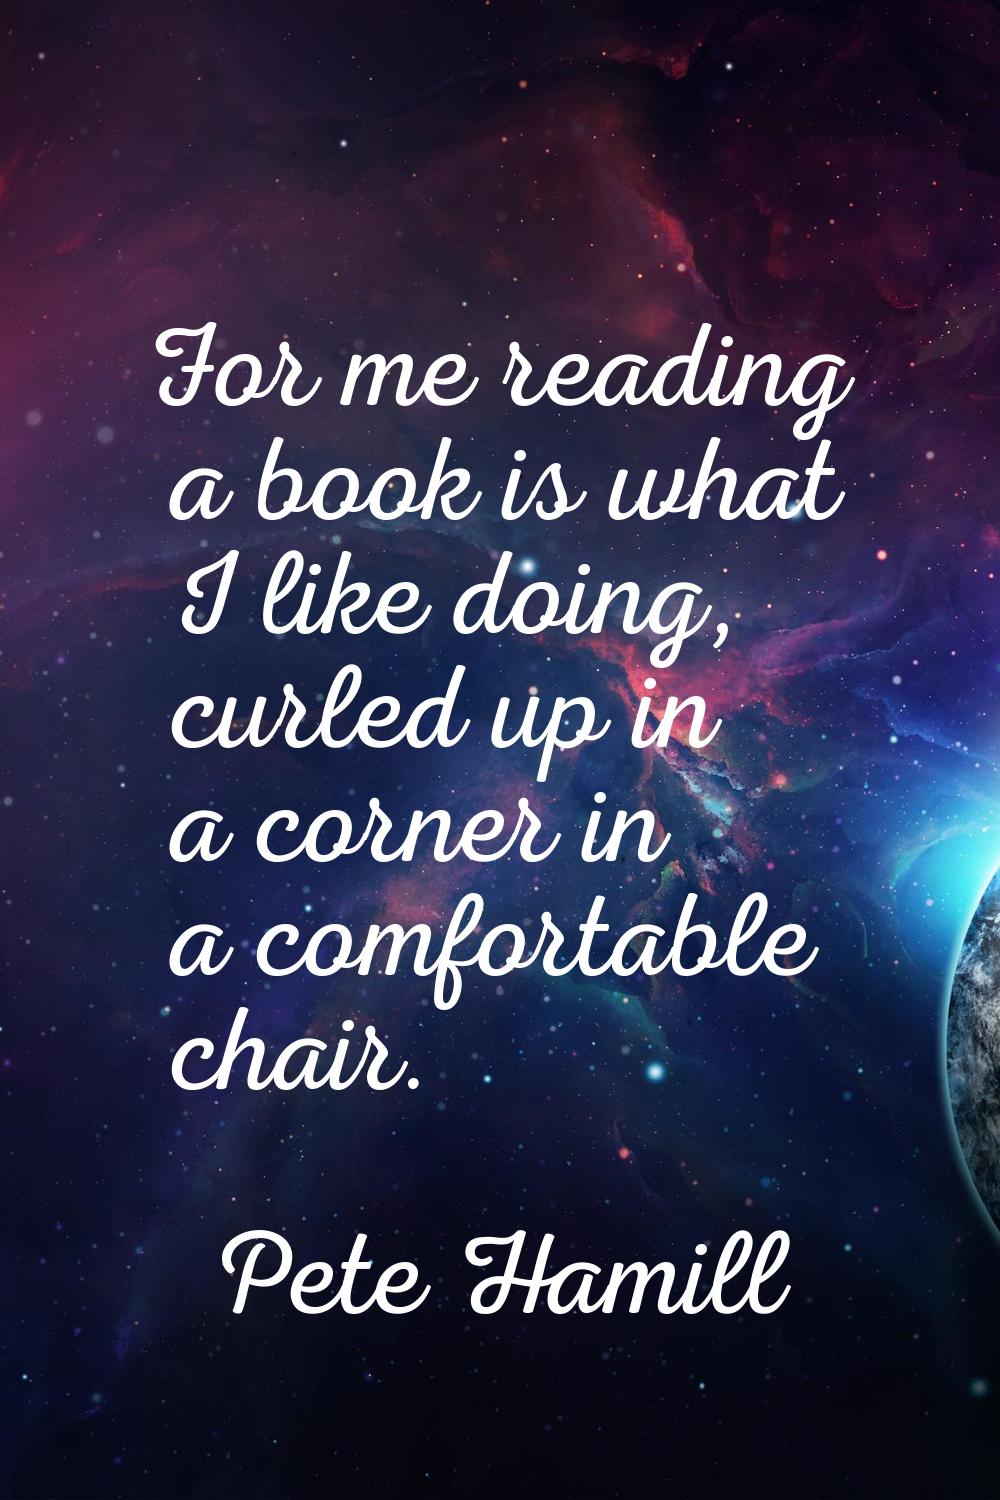 For me reading a book is what I like doing, curled up in a corner in a comfortable chair.